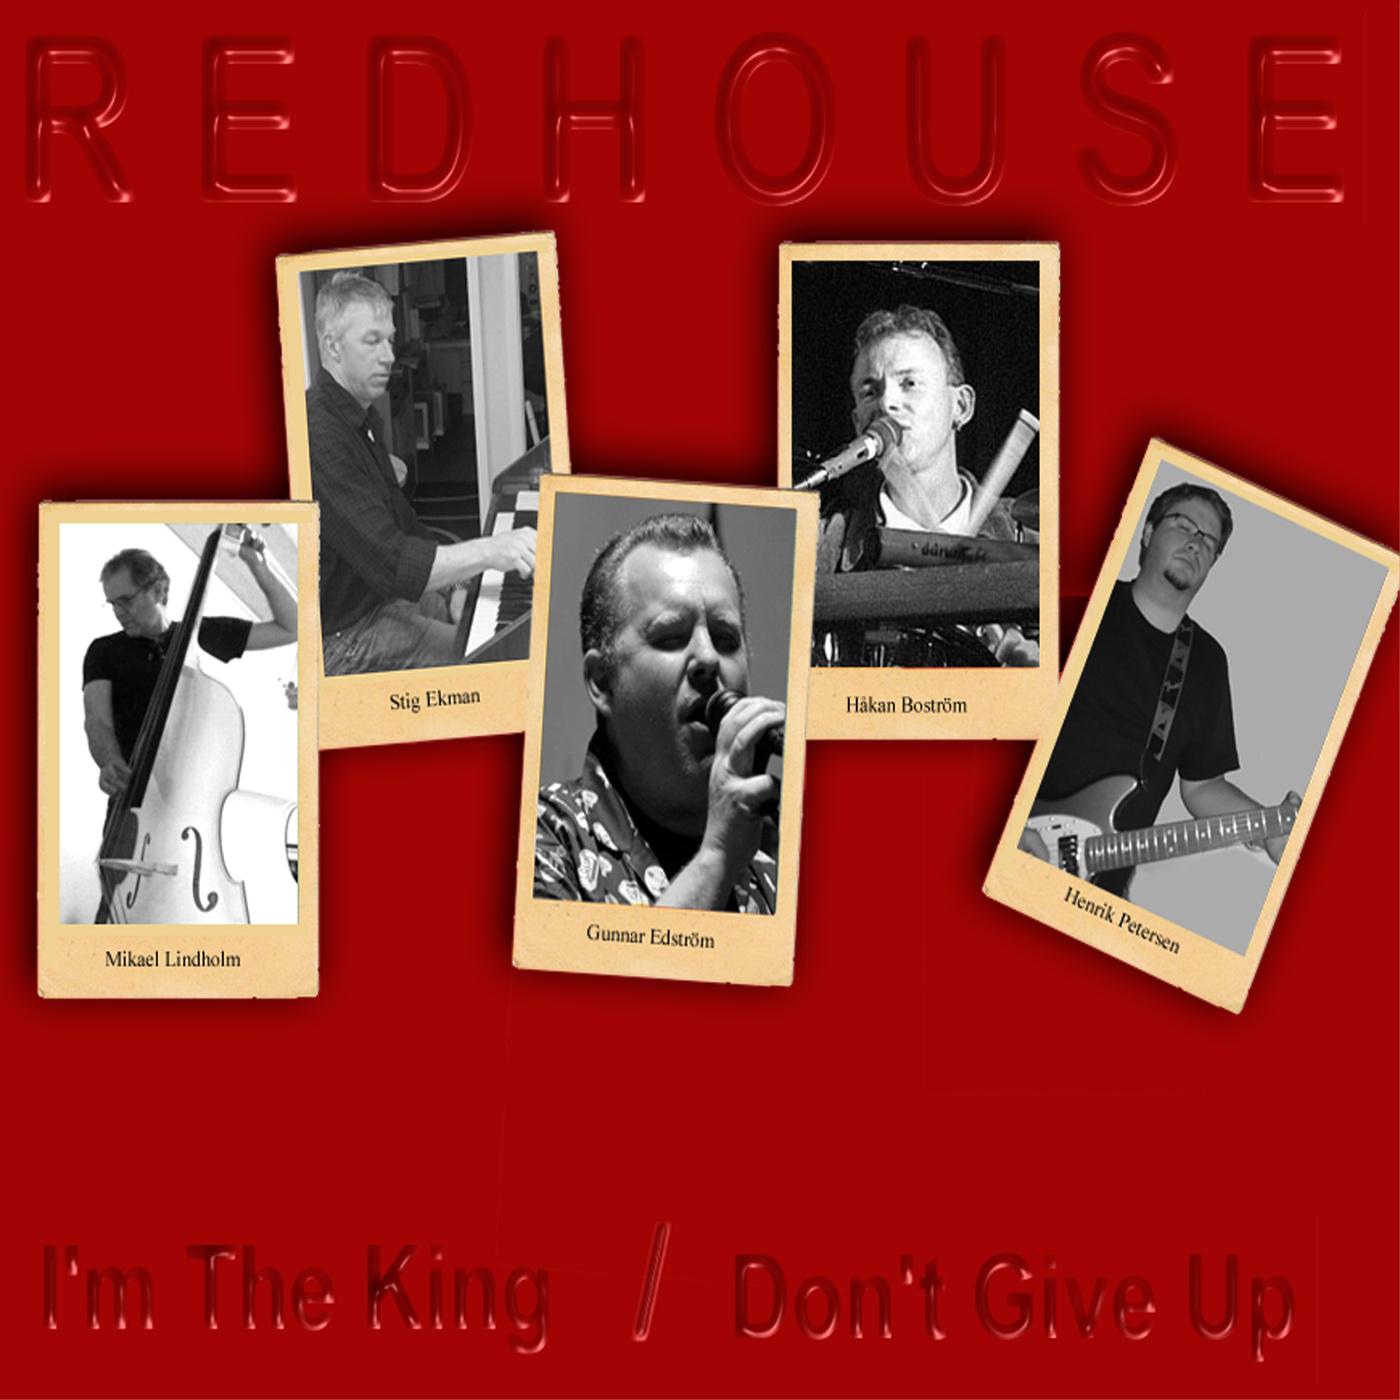 Redhouse